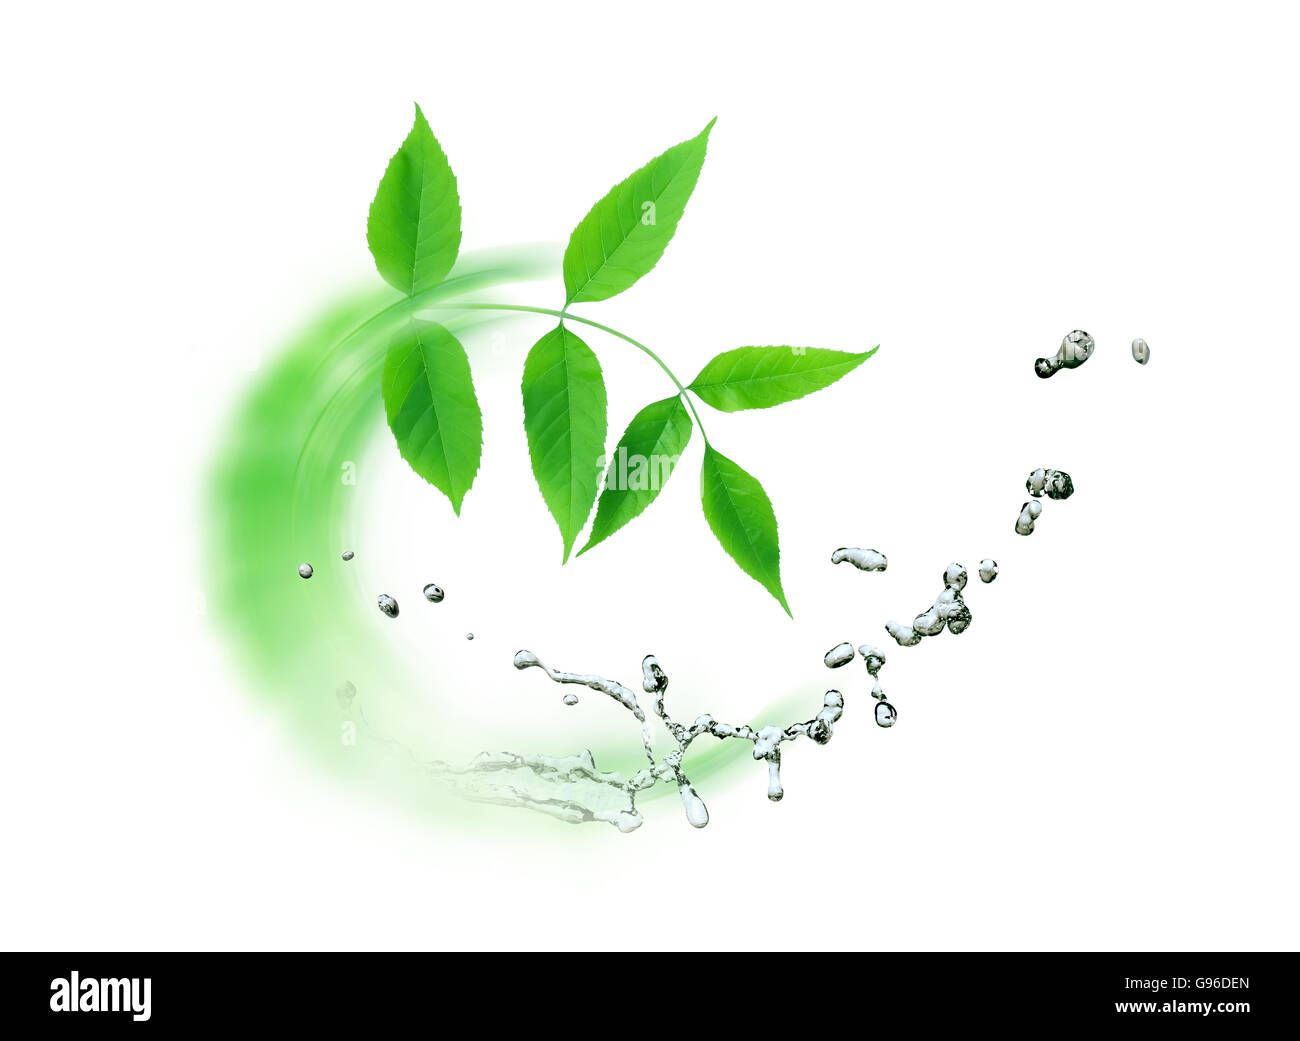 Ecology concept. Abstract composition with green leaves and splashing water Stock Photo